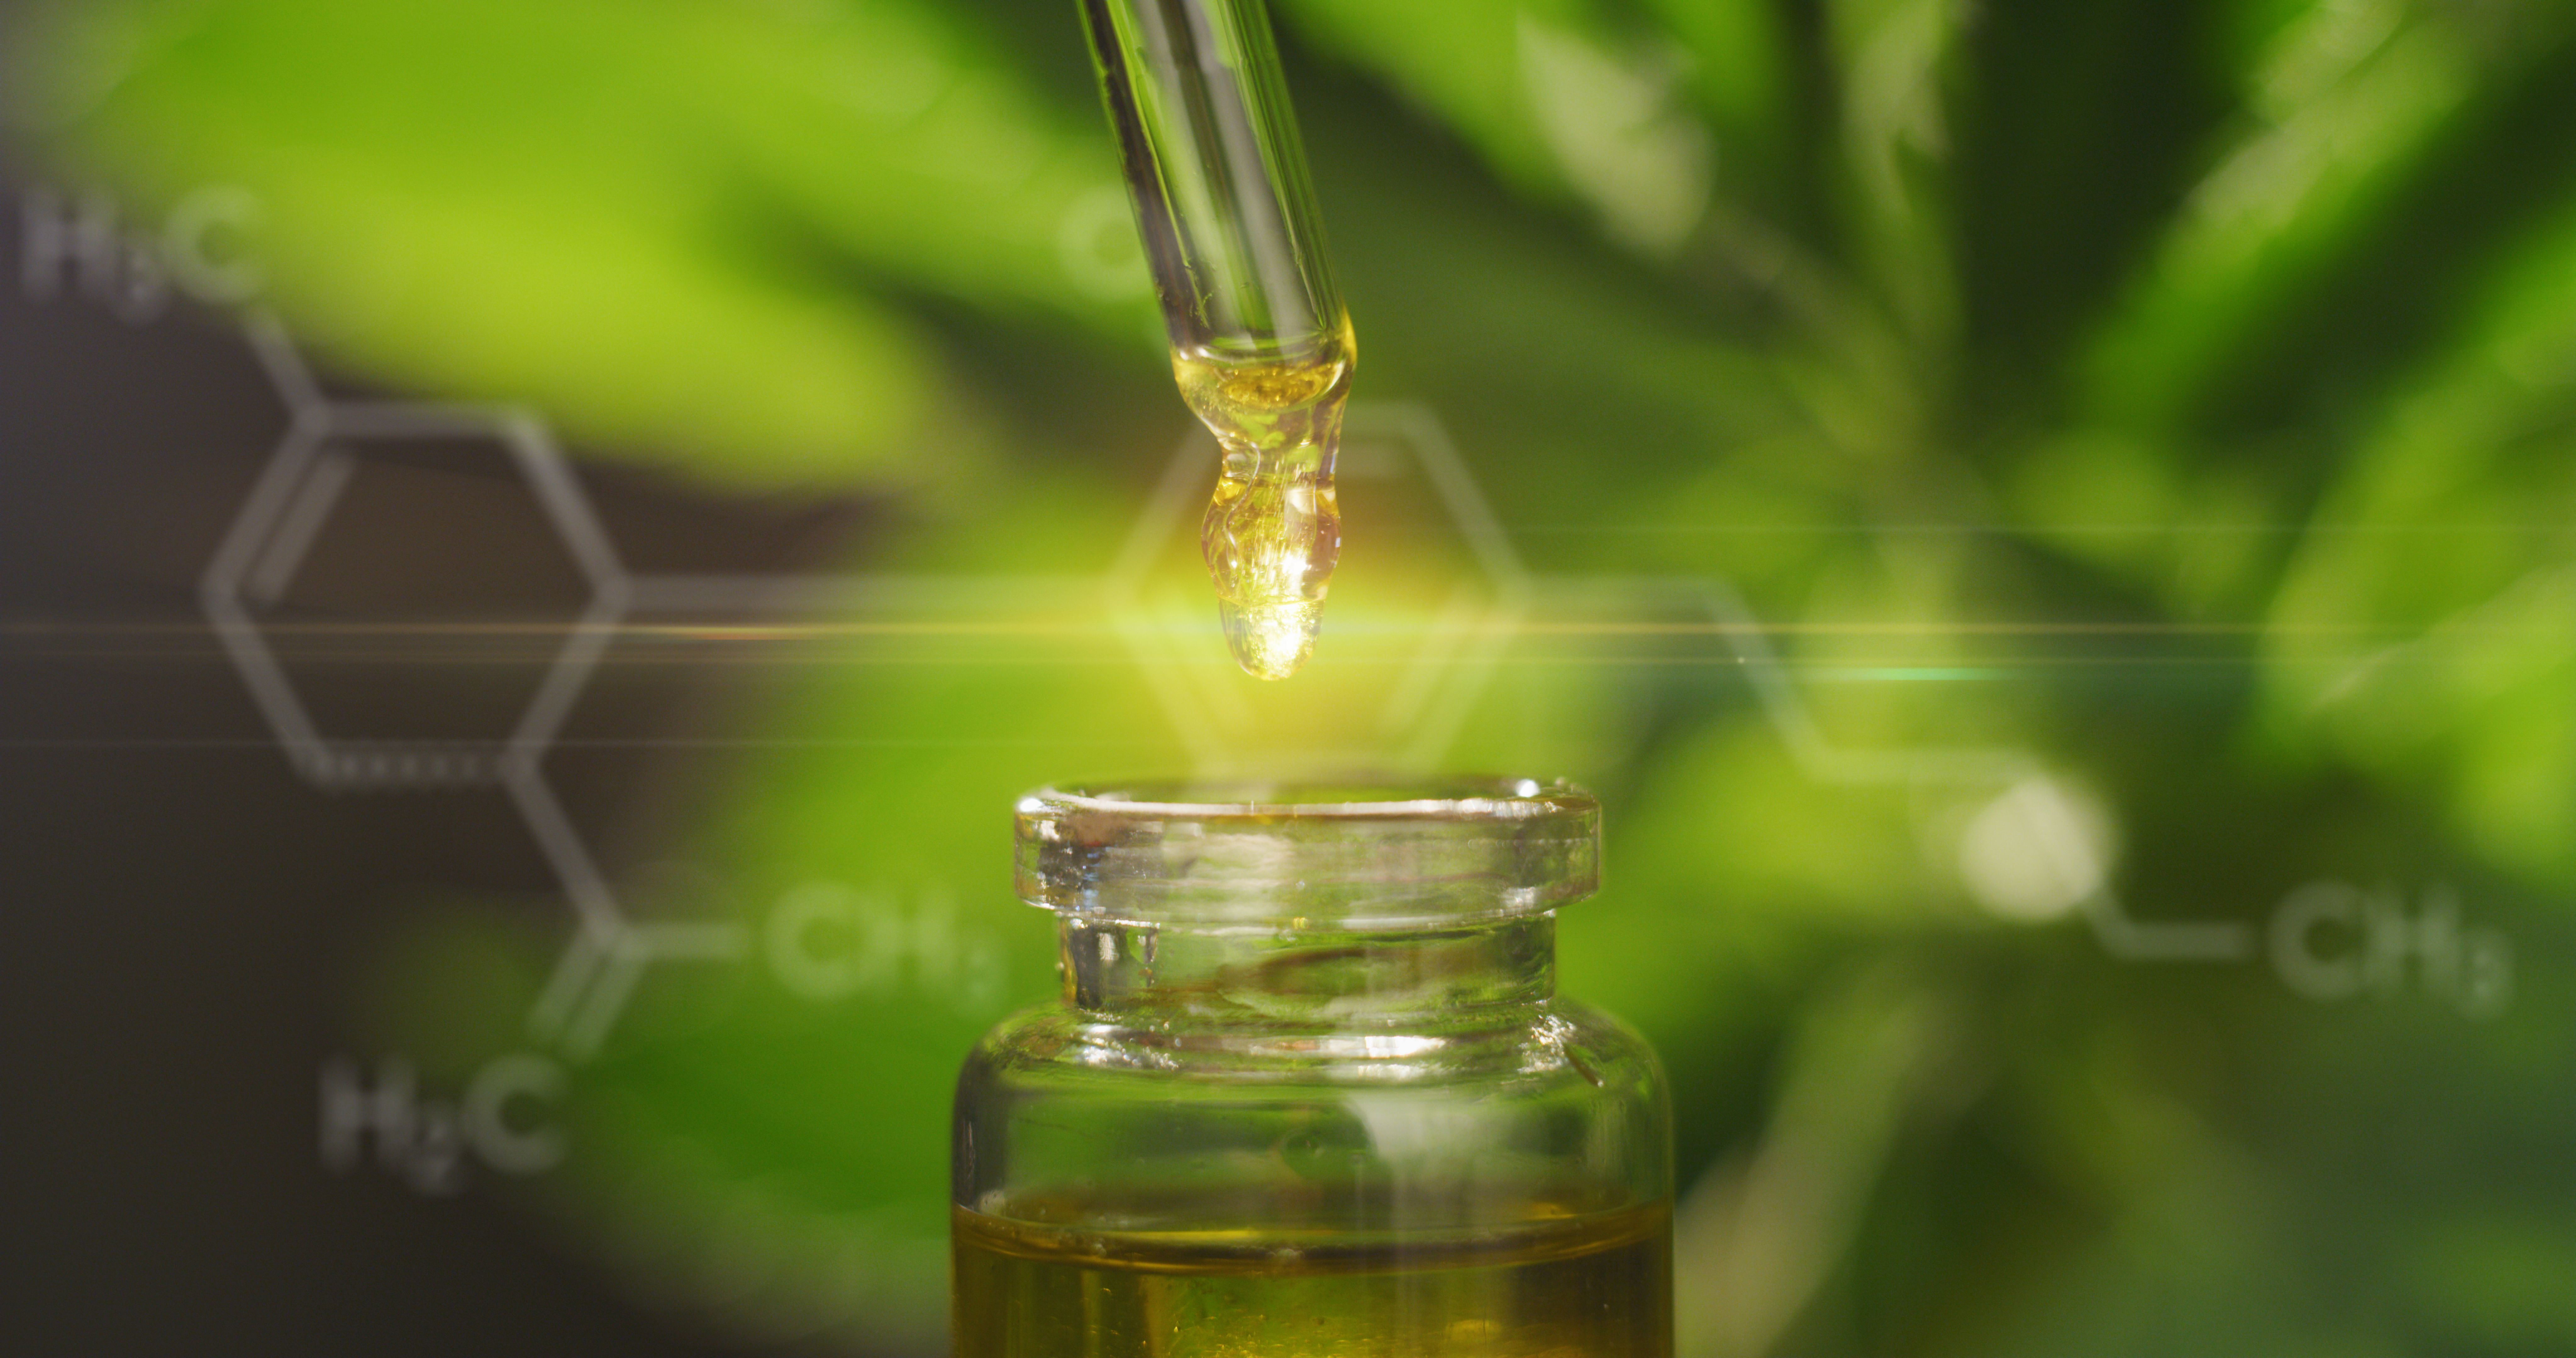 What’s the Difference Between CBD and THC?